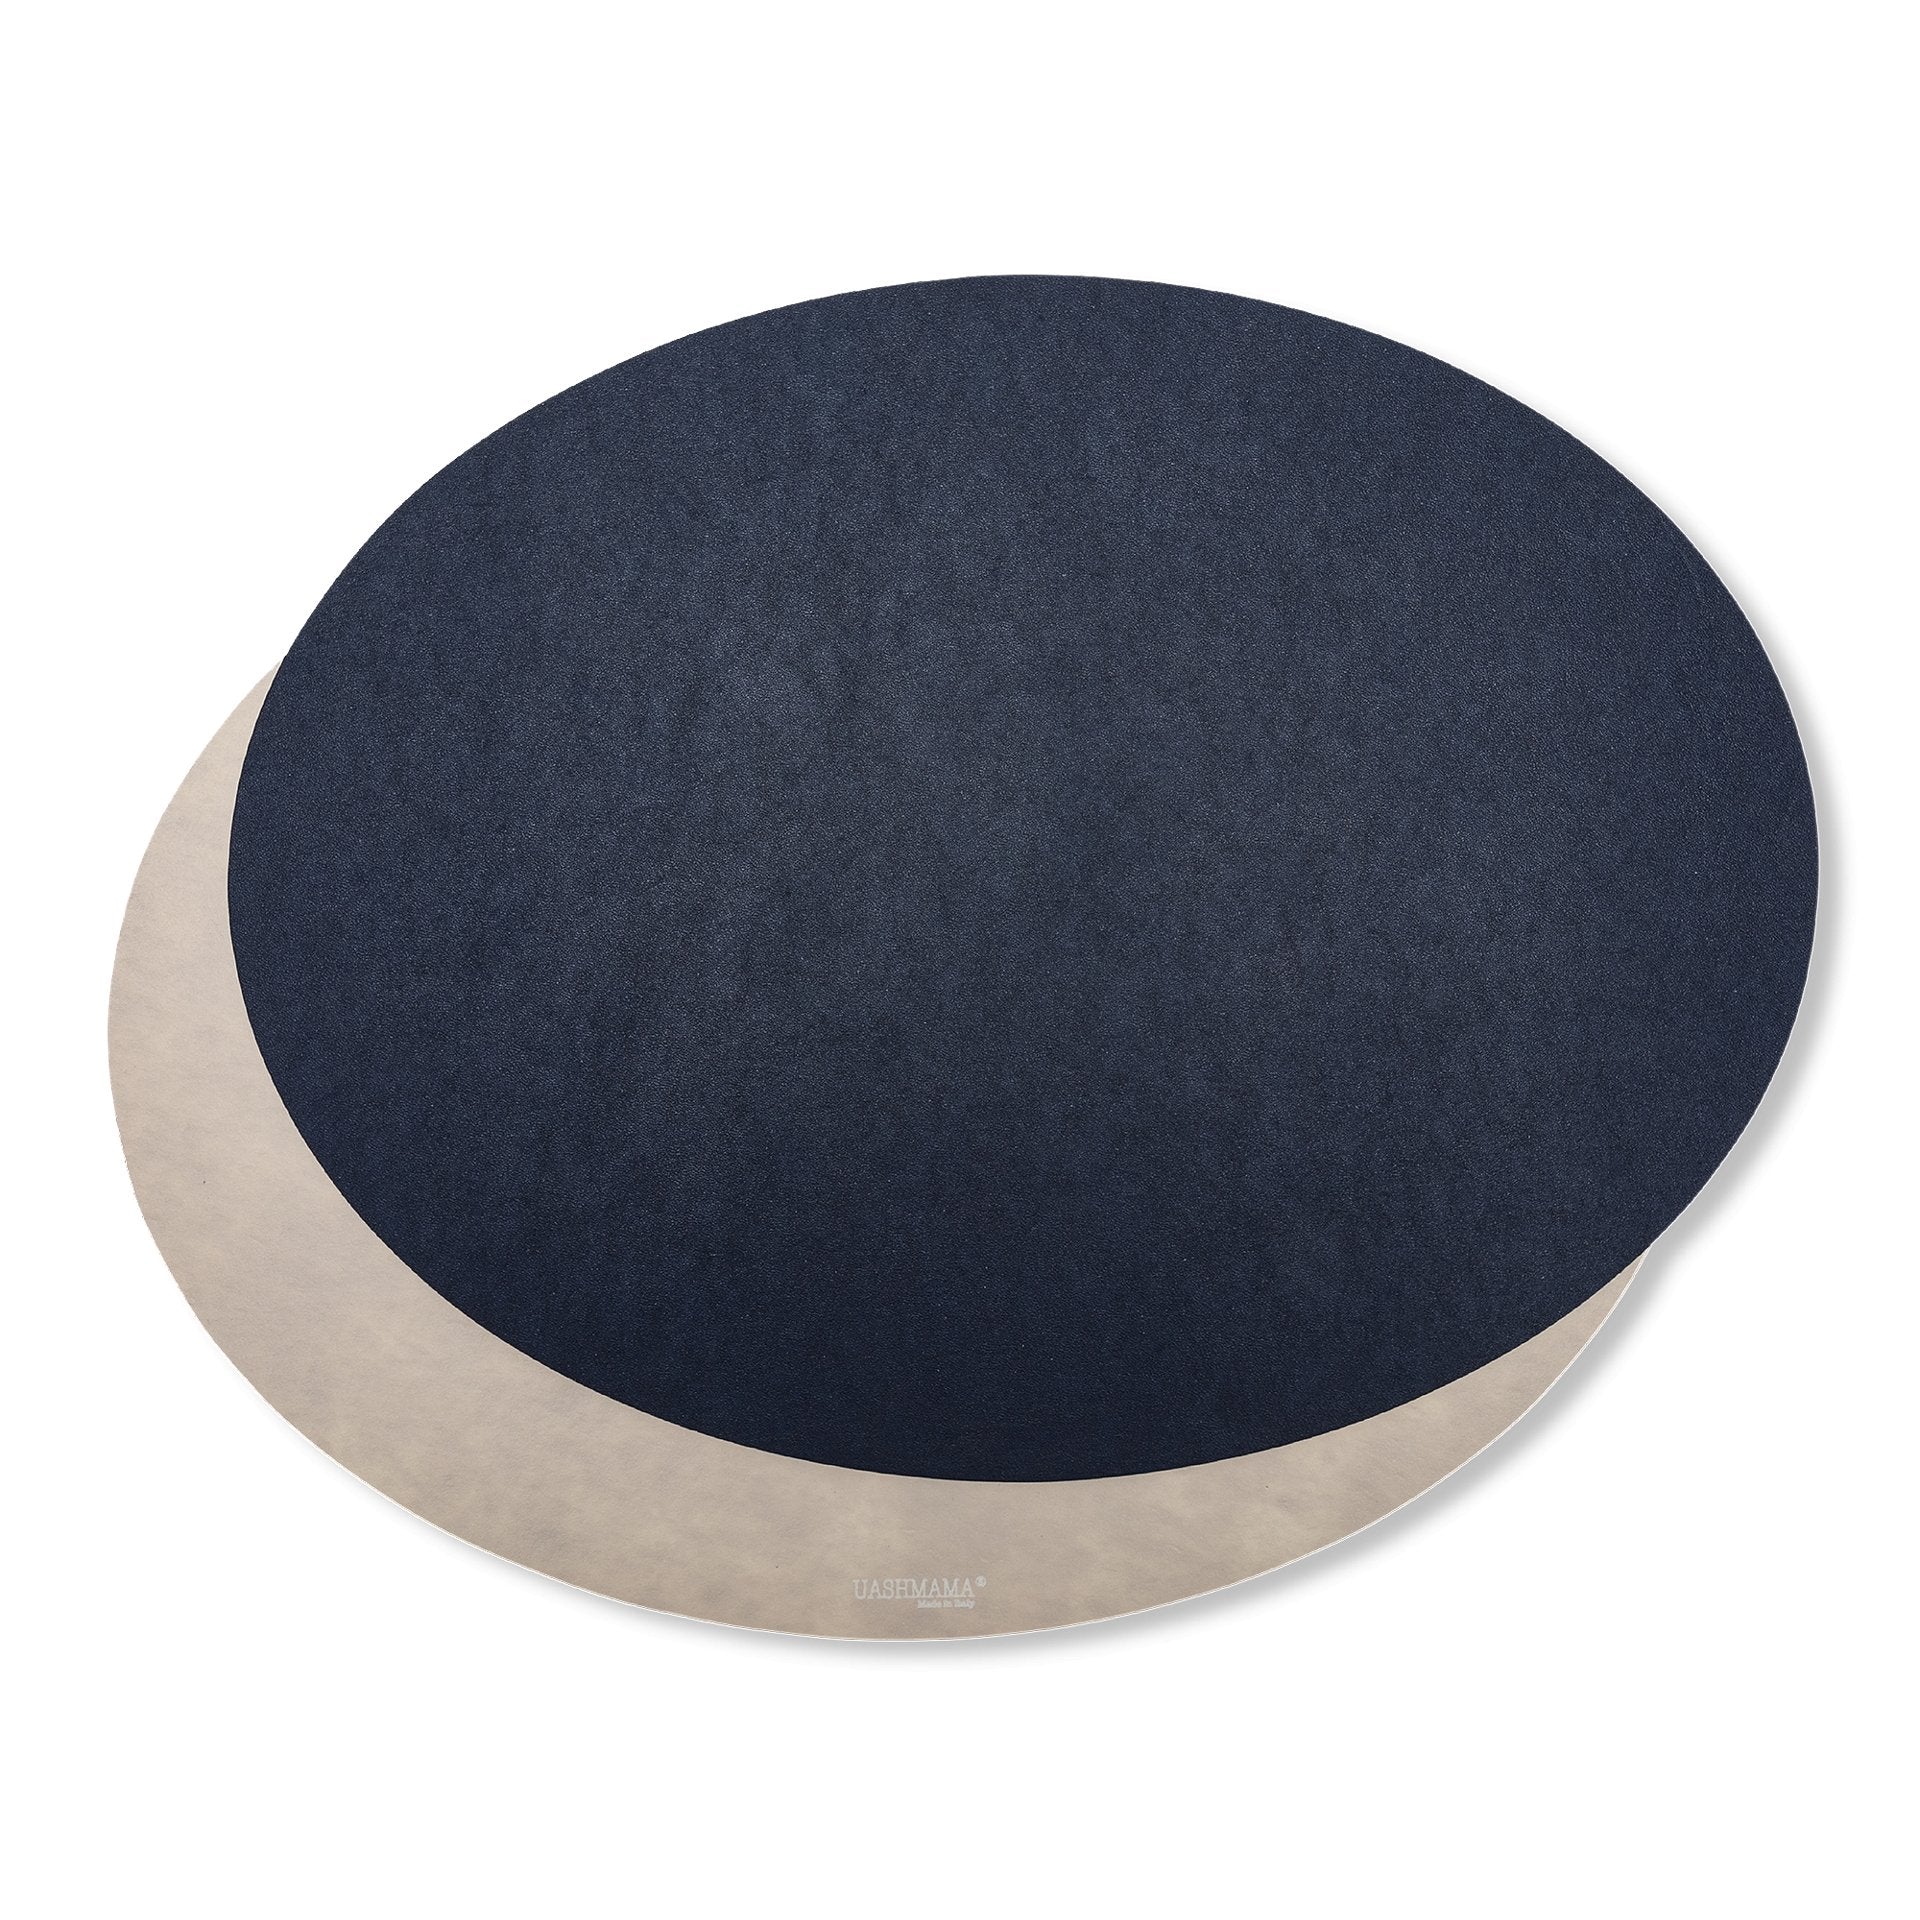 Two oval washable paper placemats are shown on top of each other. The one in the rear is beige and the one on top is navy.